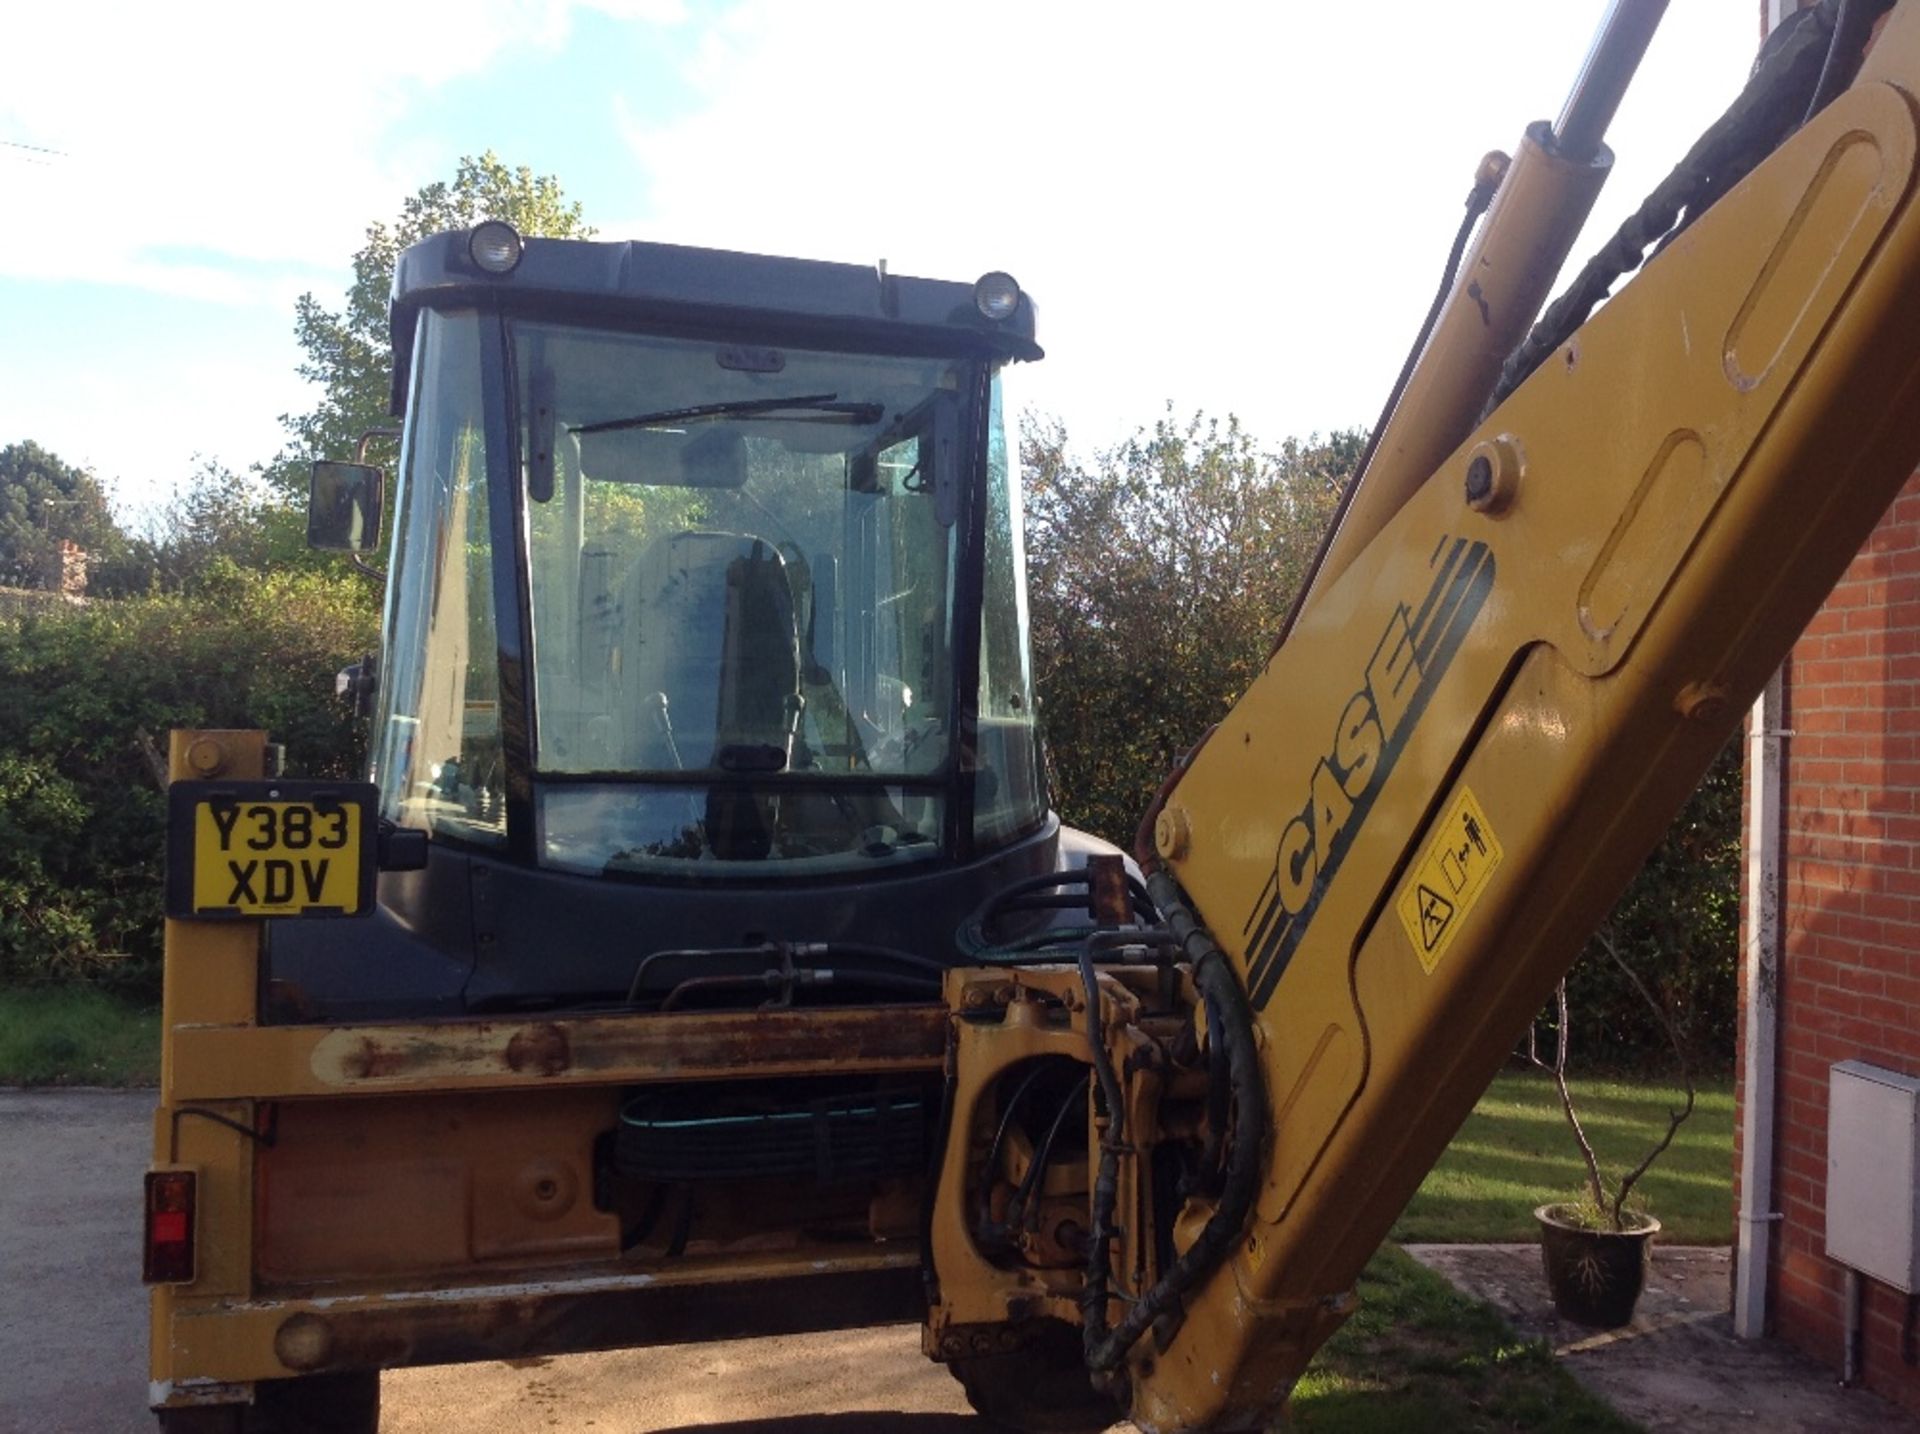 Case 595SLE Backhoe Loader, 4 in 1 front bucket with forks, telescopic rear dipper with 3 buckets,